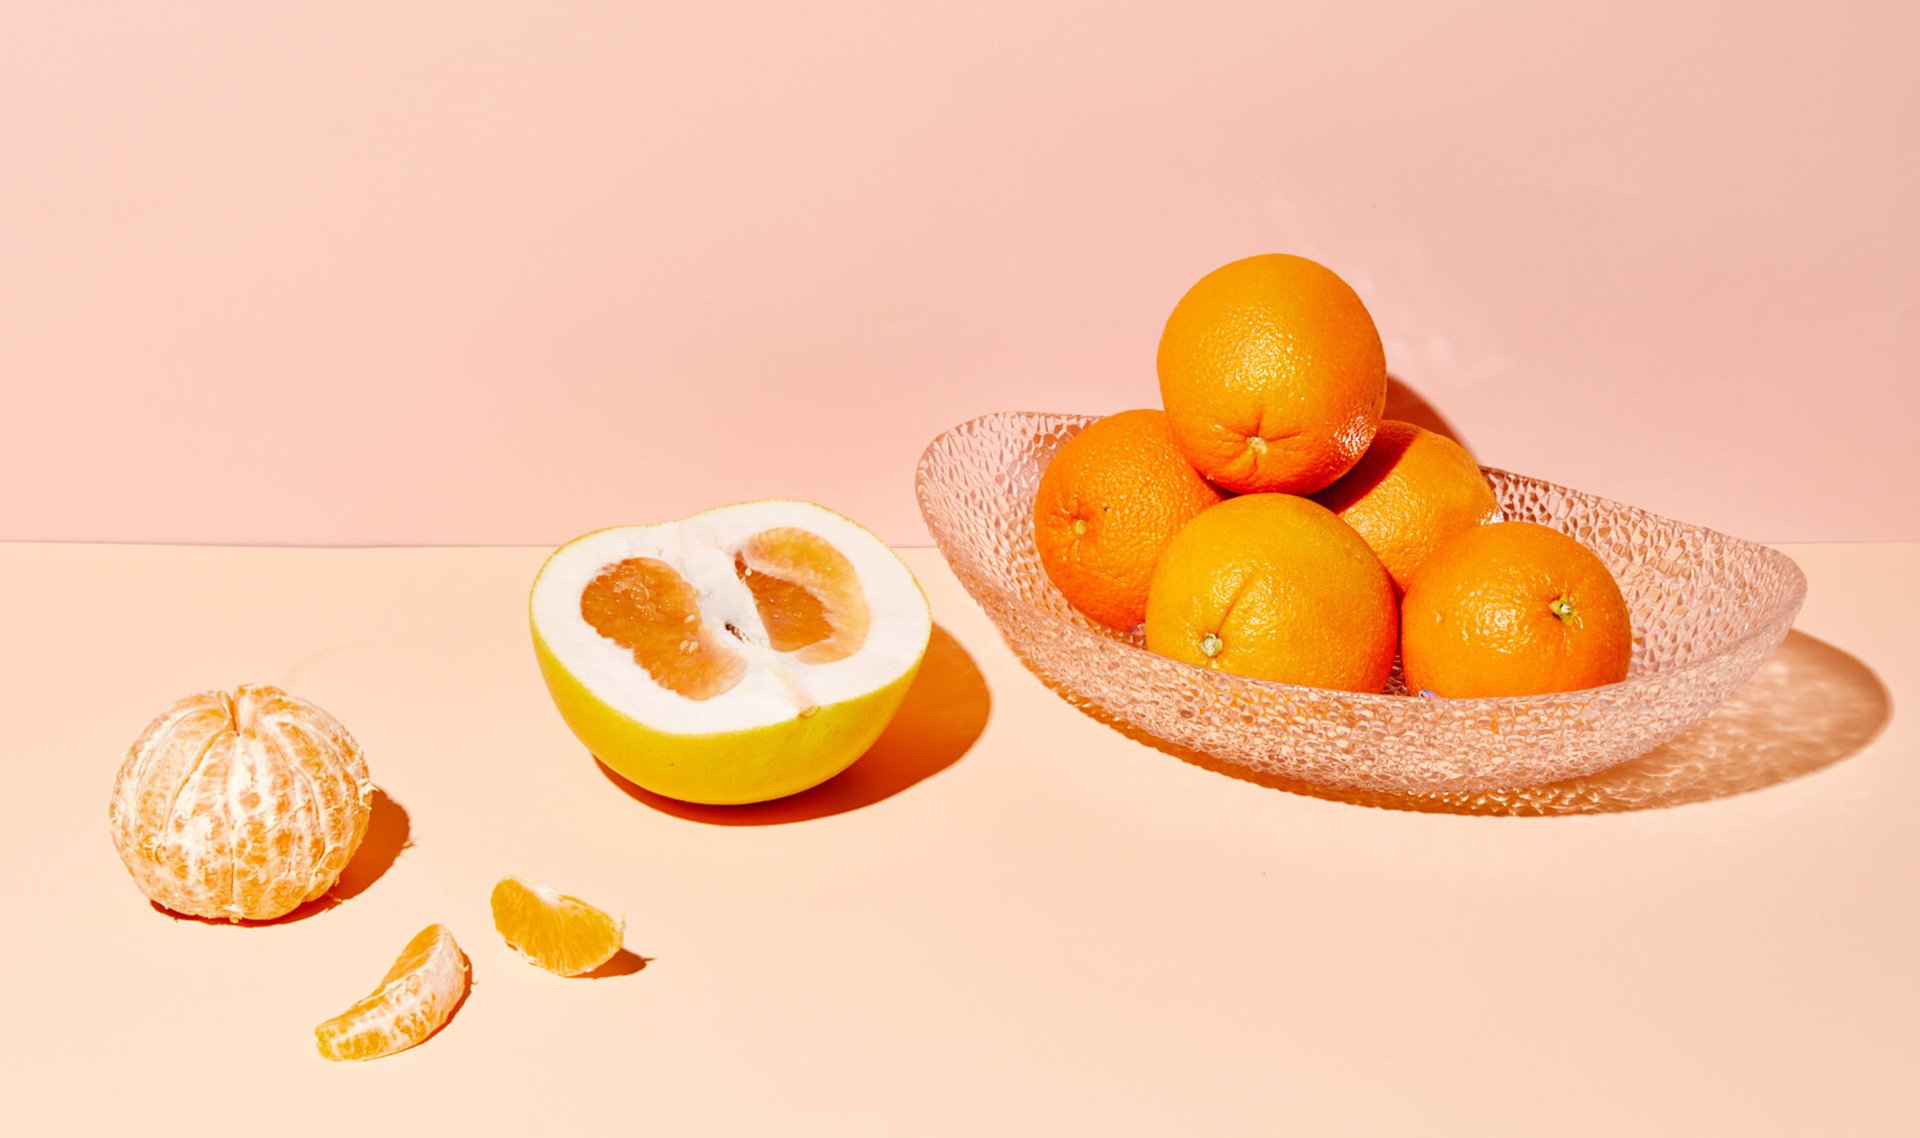 Do You Have Orange Peel Skin? Here’s How to Tell